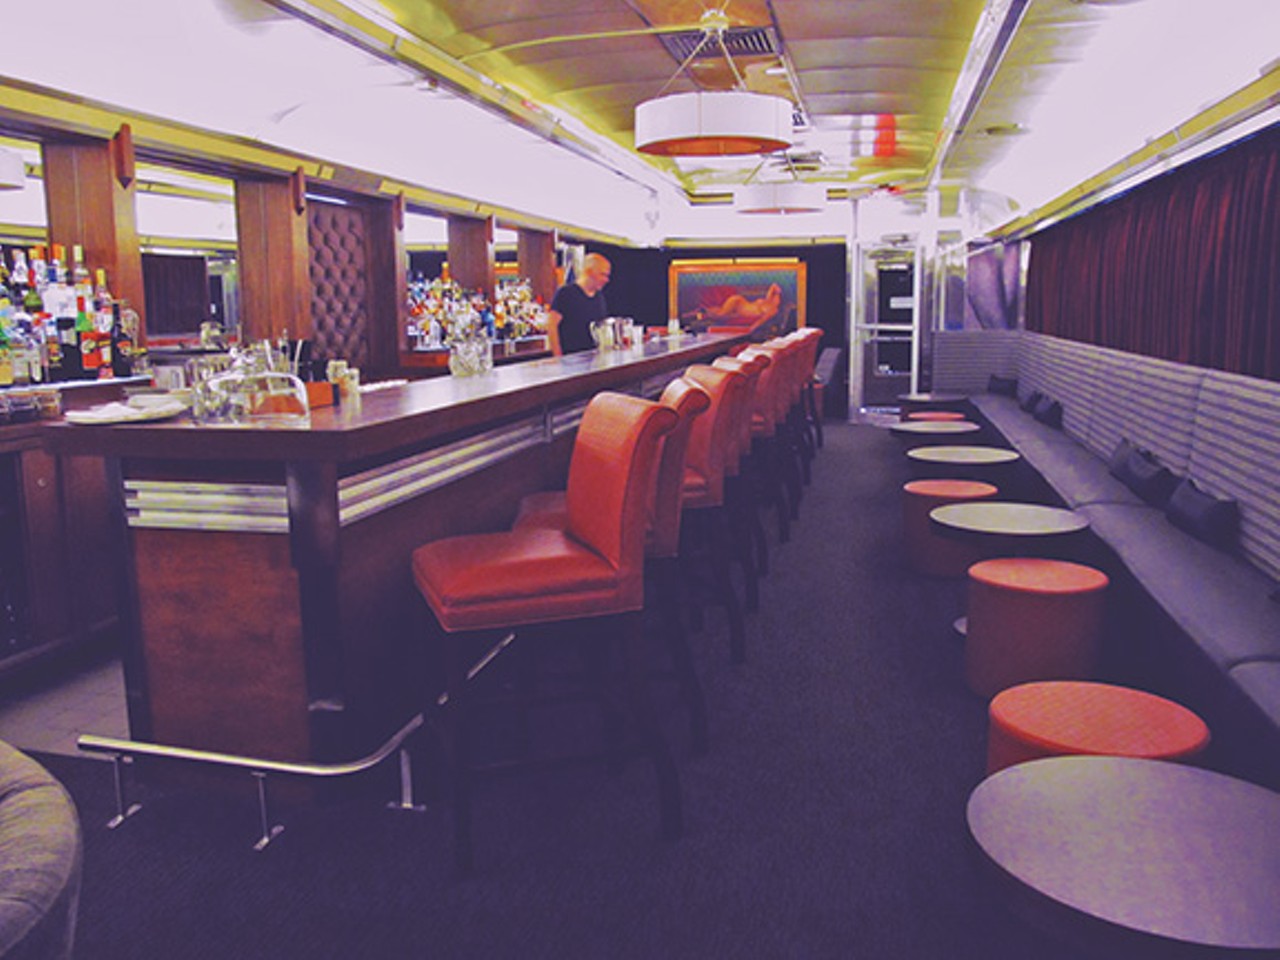 There are other cocktail lounges in Cleveland, and a good many of them are fine places to spend an evening. But we've yet to stumble across one as intoxicating as the Katz Club. Long abused, and occupied by a sad series of doomed ventures, the elegantly decorated Mountain View dining car has been given a new lease on life as the speakeasy of our dreams. Thanks to reality blocking drapery, guests can pretend they're just about anywhere. But we prefer to accept the fact that we're right here, where classic drinks like Sazeracs, Old Fashioneds, Pisco Sours and Ramos Gin Fizzes are crafted with due care. Sitting at the lengthy wood bar and sipping ice cold martinis in a stately bar car from the past just might be our new favorite pastime. If and when hunger strikes, order up a platter of West Coast oysters, or nibble on mini potato latkes topped with house-smoked salmon and a dollop of crème fraiche. One friend put it best when he said, "It's a throwback place. It reminds me of a sexy joint you'd find in New York City or Chicago. And the music is great, perfect for a club like this." True and truer.